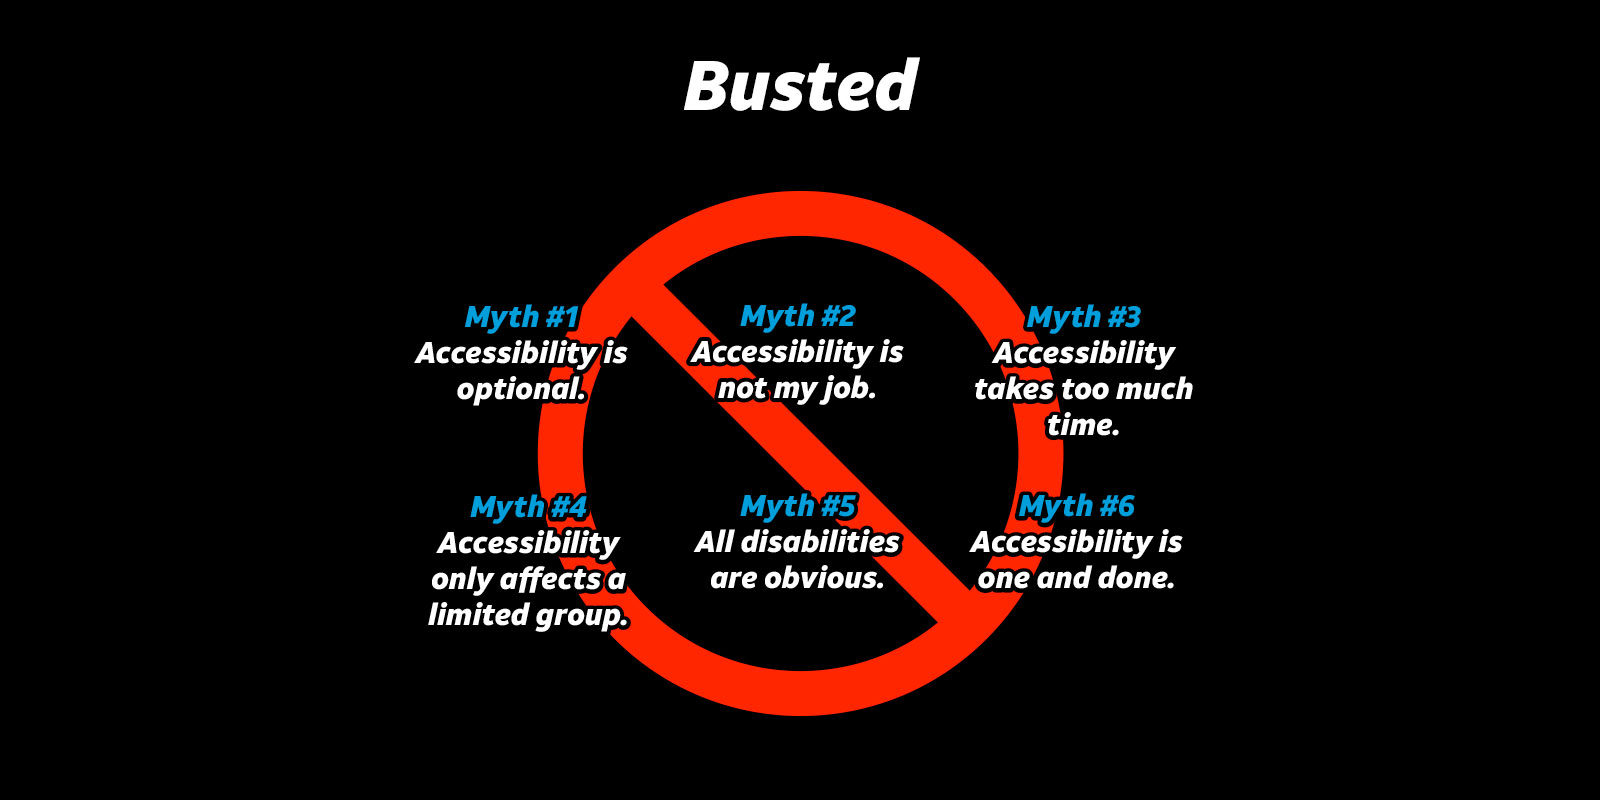 Summary list of busted myths from story above